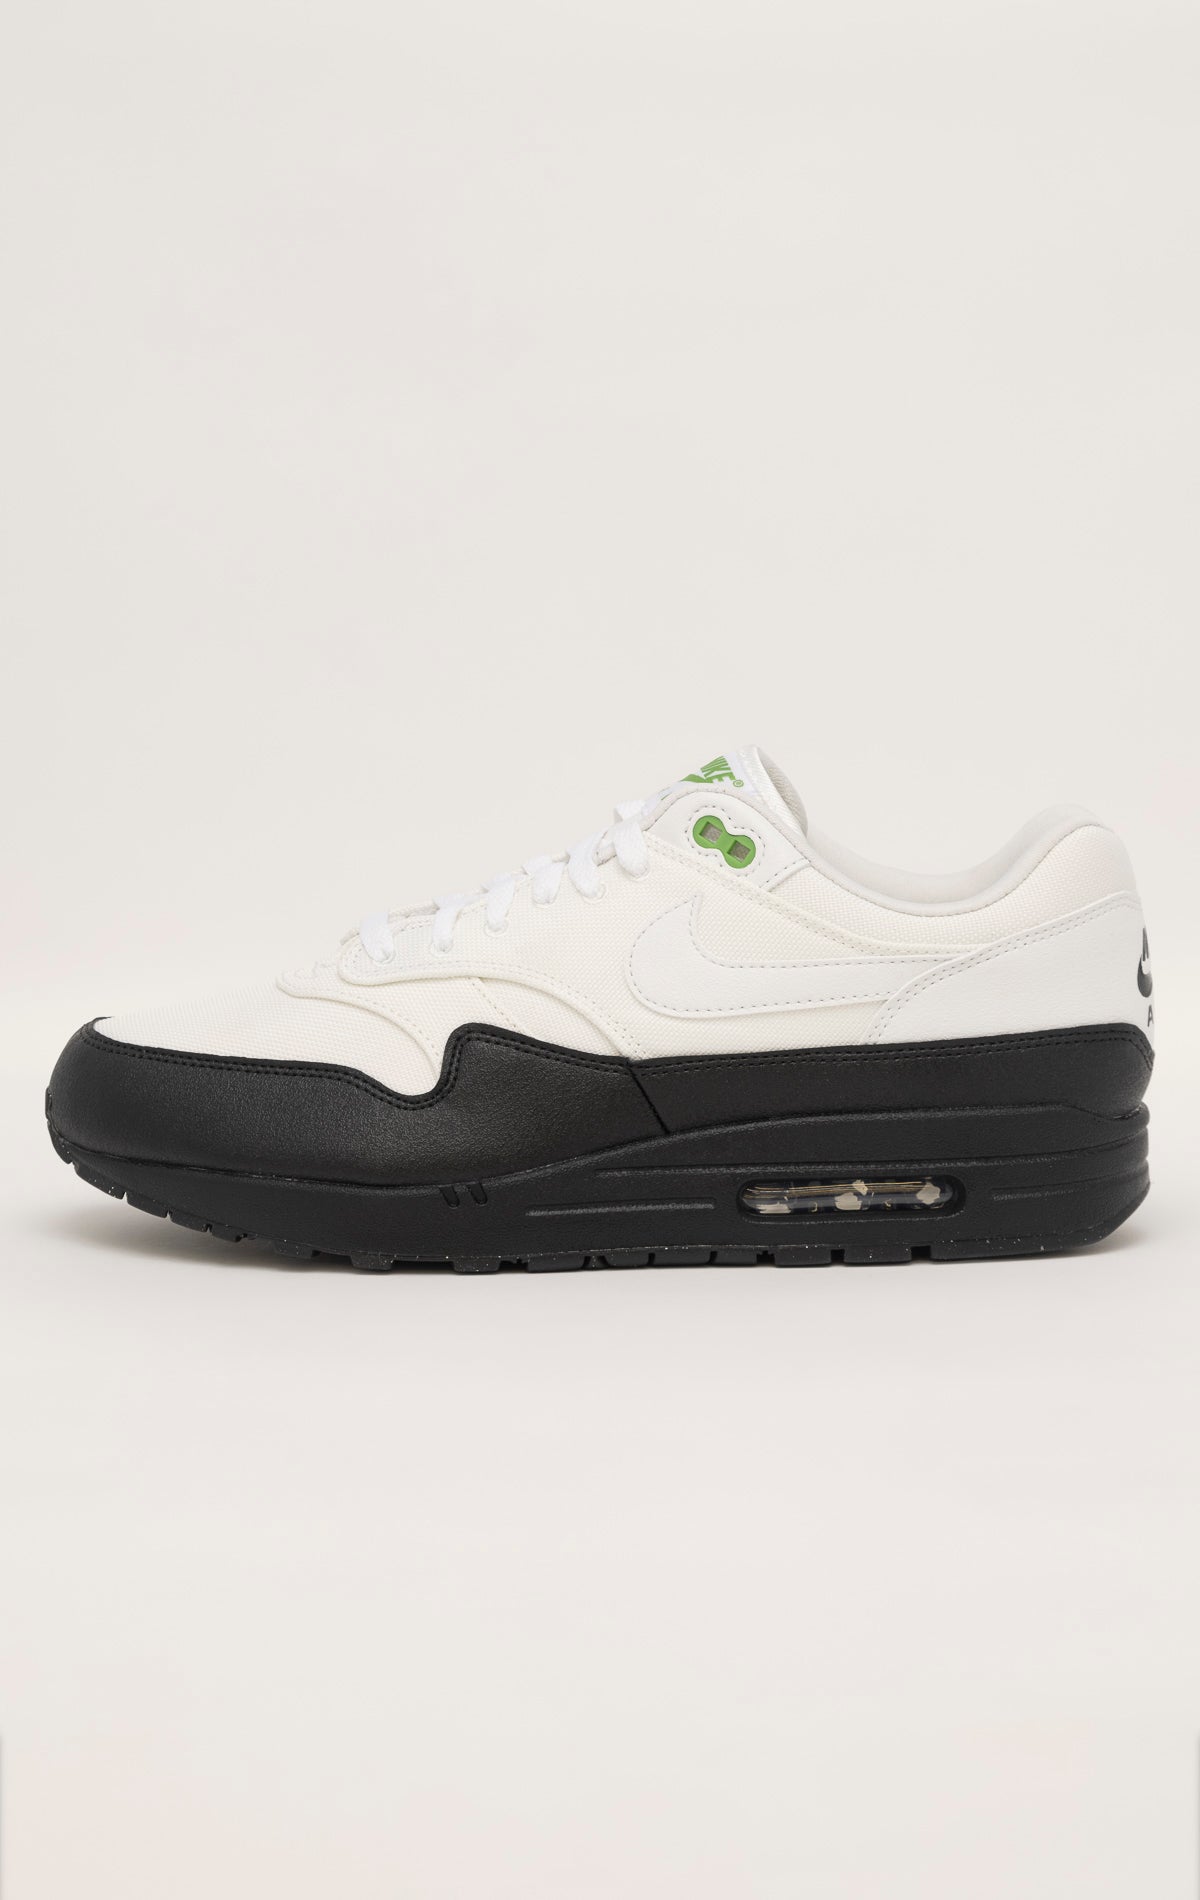 Green and white Nike Air Max 1 SE sneakers with a canvas upper, leather accents, and visible Air unit in the heel and forefoot